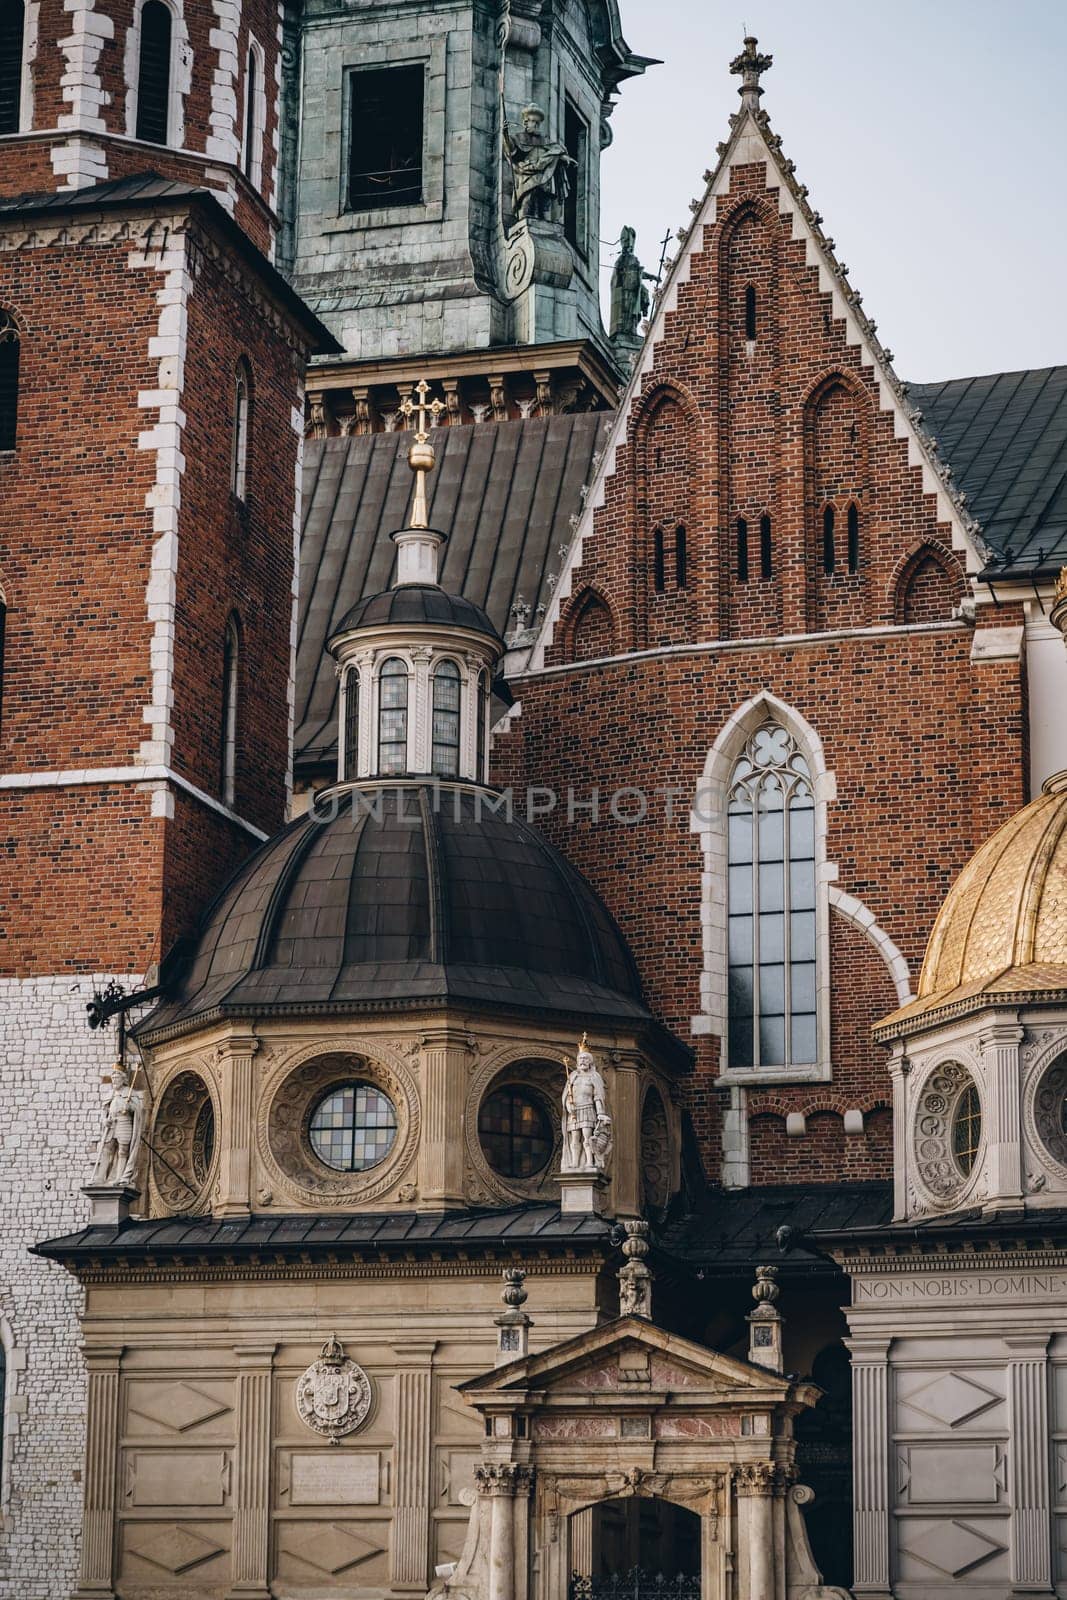 King statue, mosaic lancet and round windows and decorative columns on walls of Wawel Royal Castle, Krakow, Poland